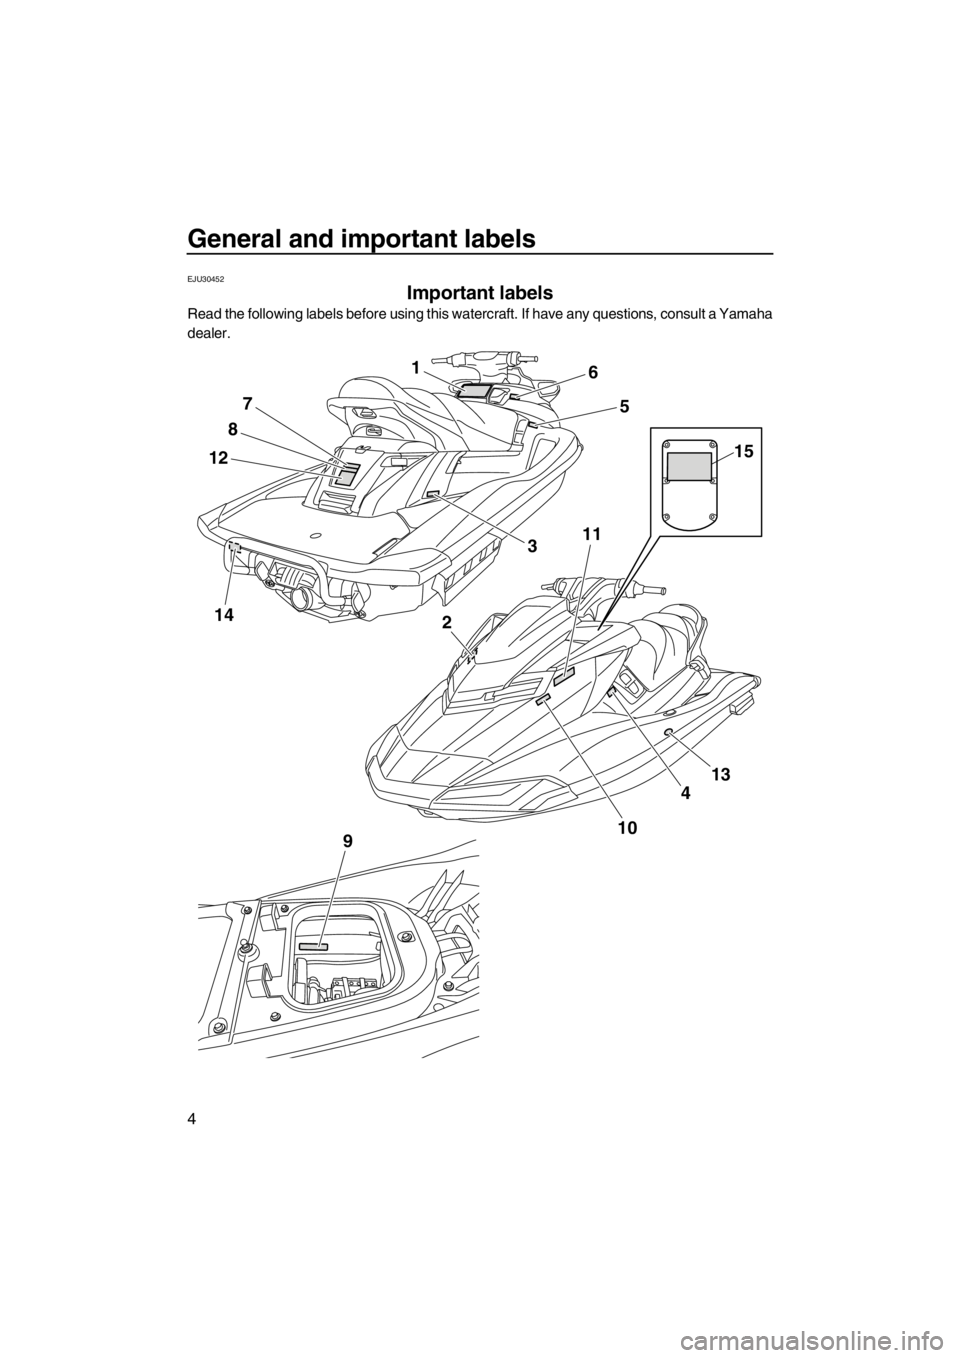 YAMAHA FX SHO 2012  Owners Manual General and important labels
4
EJU30452
Important labels 
Read the following labels before using this watercraft. If have any questions, consult a Yamaha
dealer.
14
1
12
8
7
11
2
9
4
13
10
6
5
3
15
UF